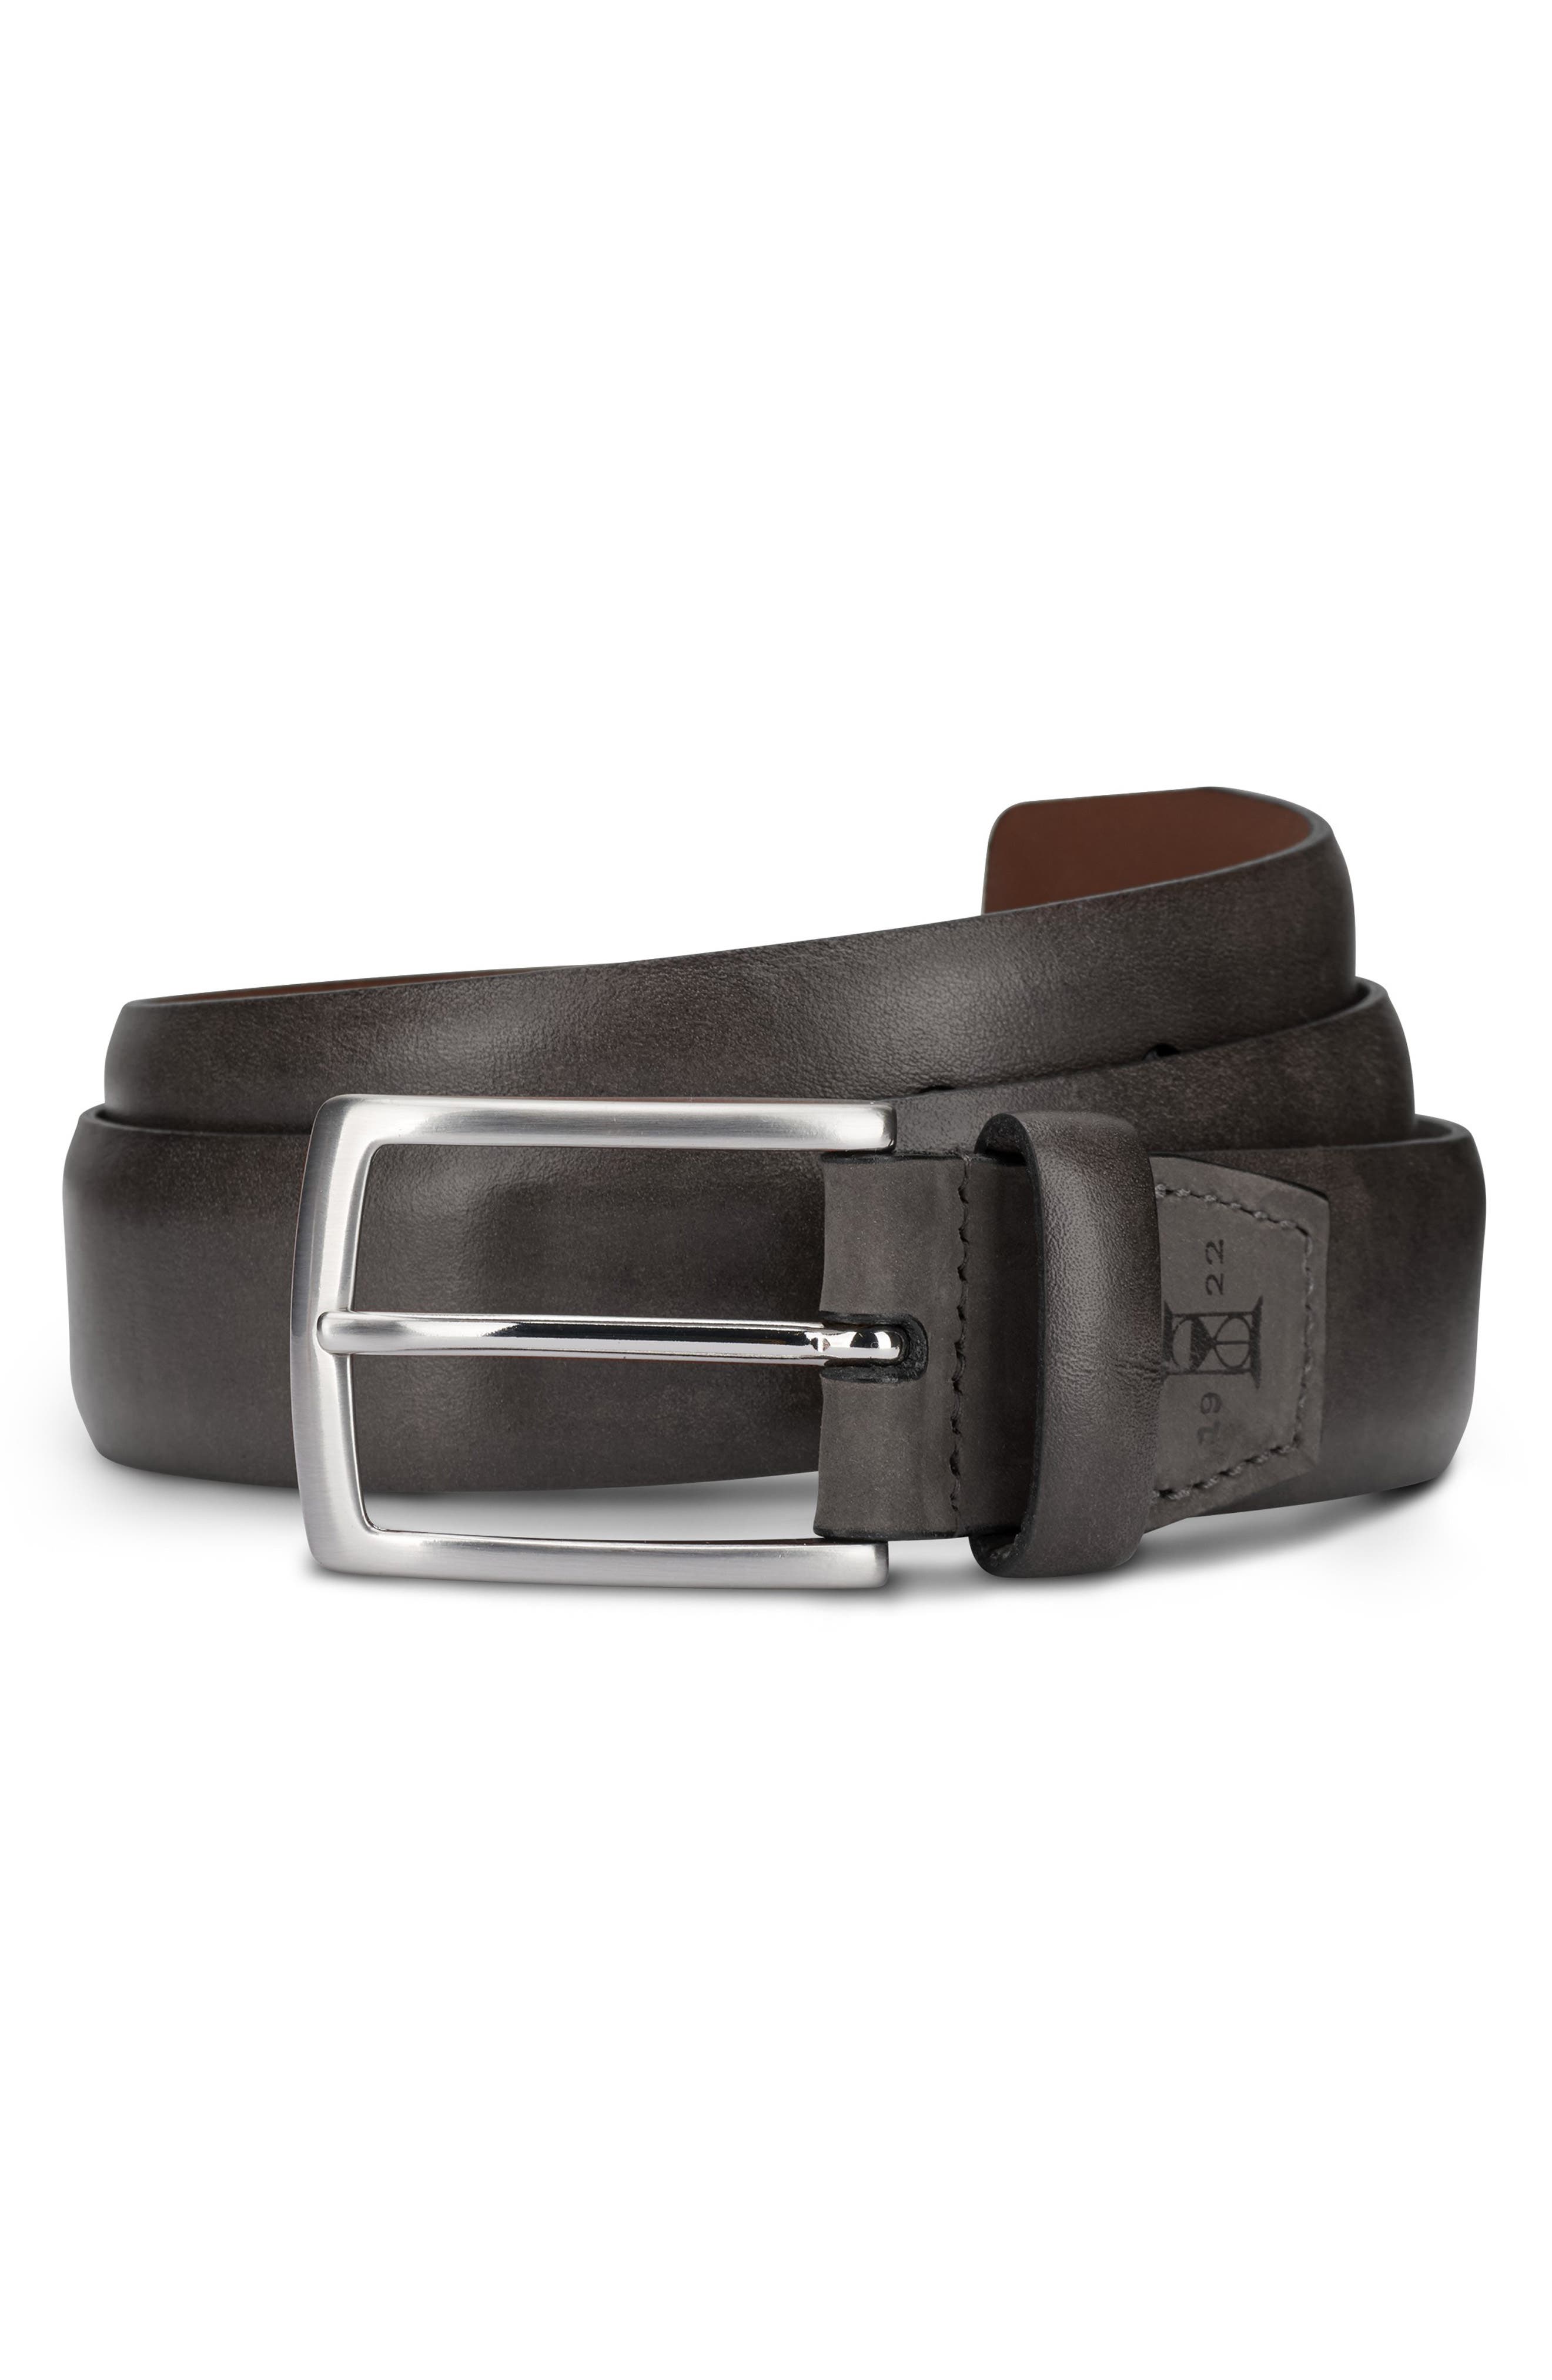 48/" NEW MENS GREY LEATHER BELT STYLE 5401 SIZE 32/"